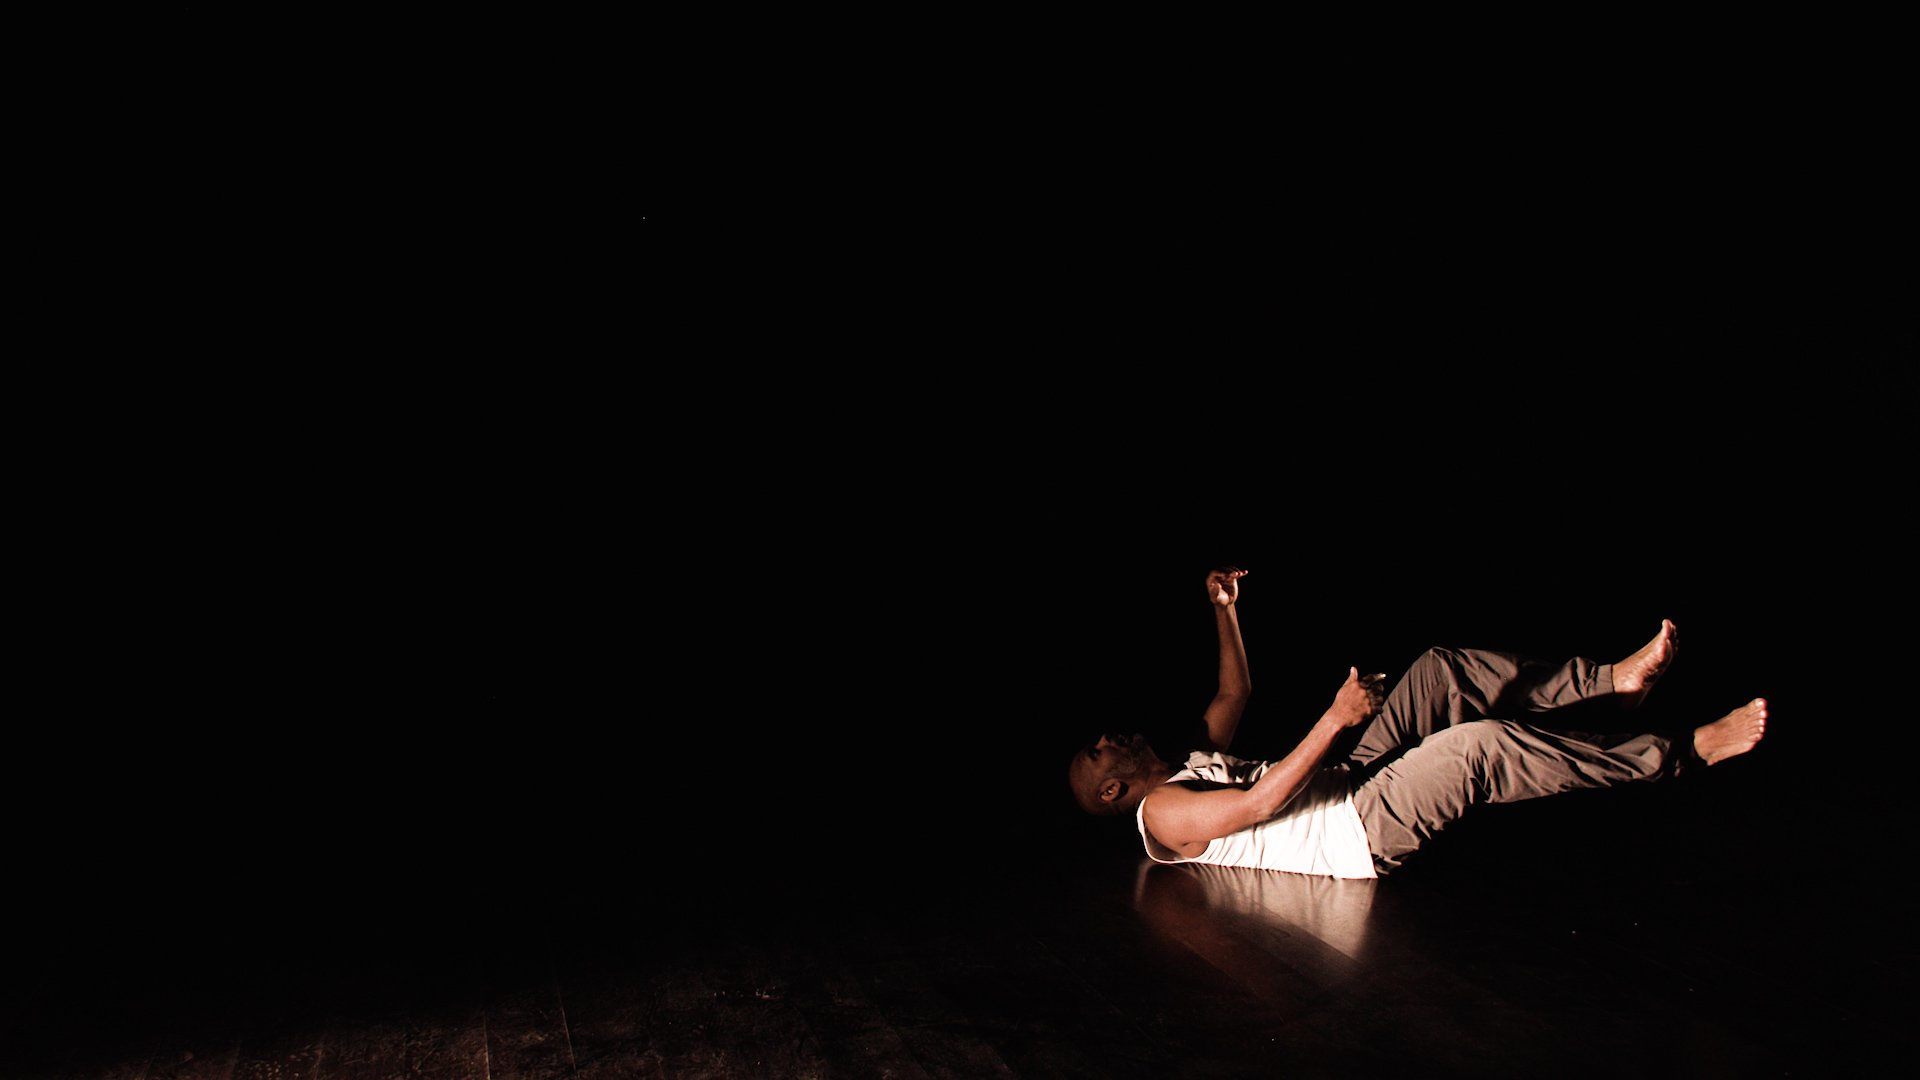  Photo of actor Ramesh Meyyappan. He is to the right hand side of the image and wearing a white vest and grey trousers. He is against a black background and sparsely lit. He appears to have just fallen onto his back and has his arms and legs raised. 